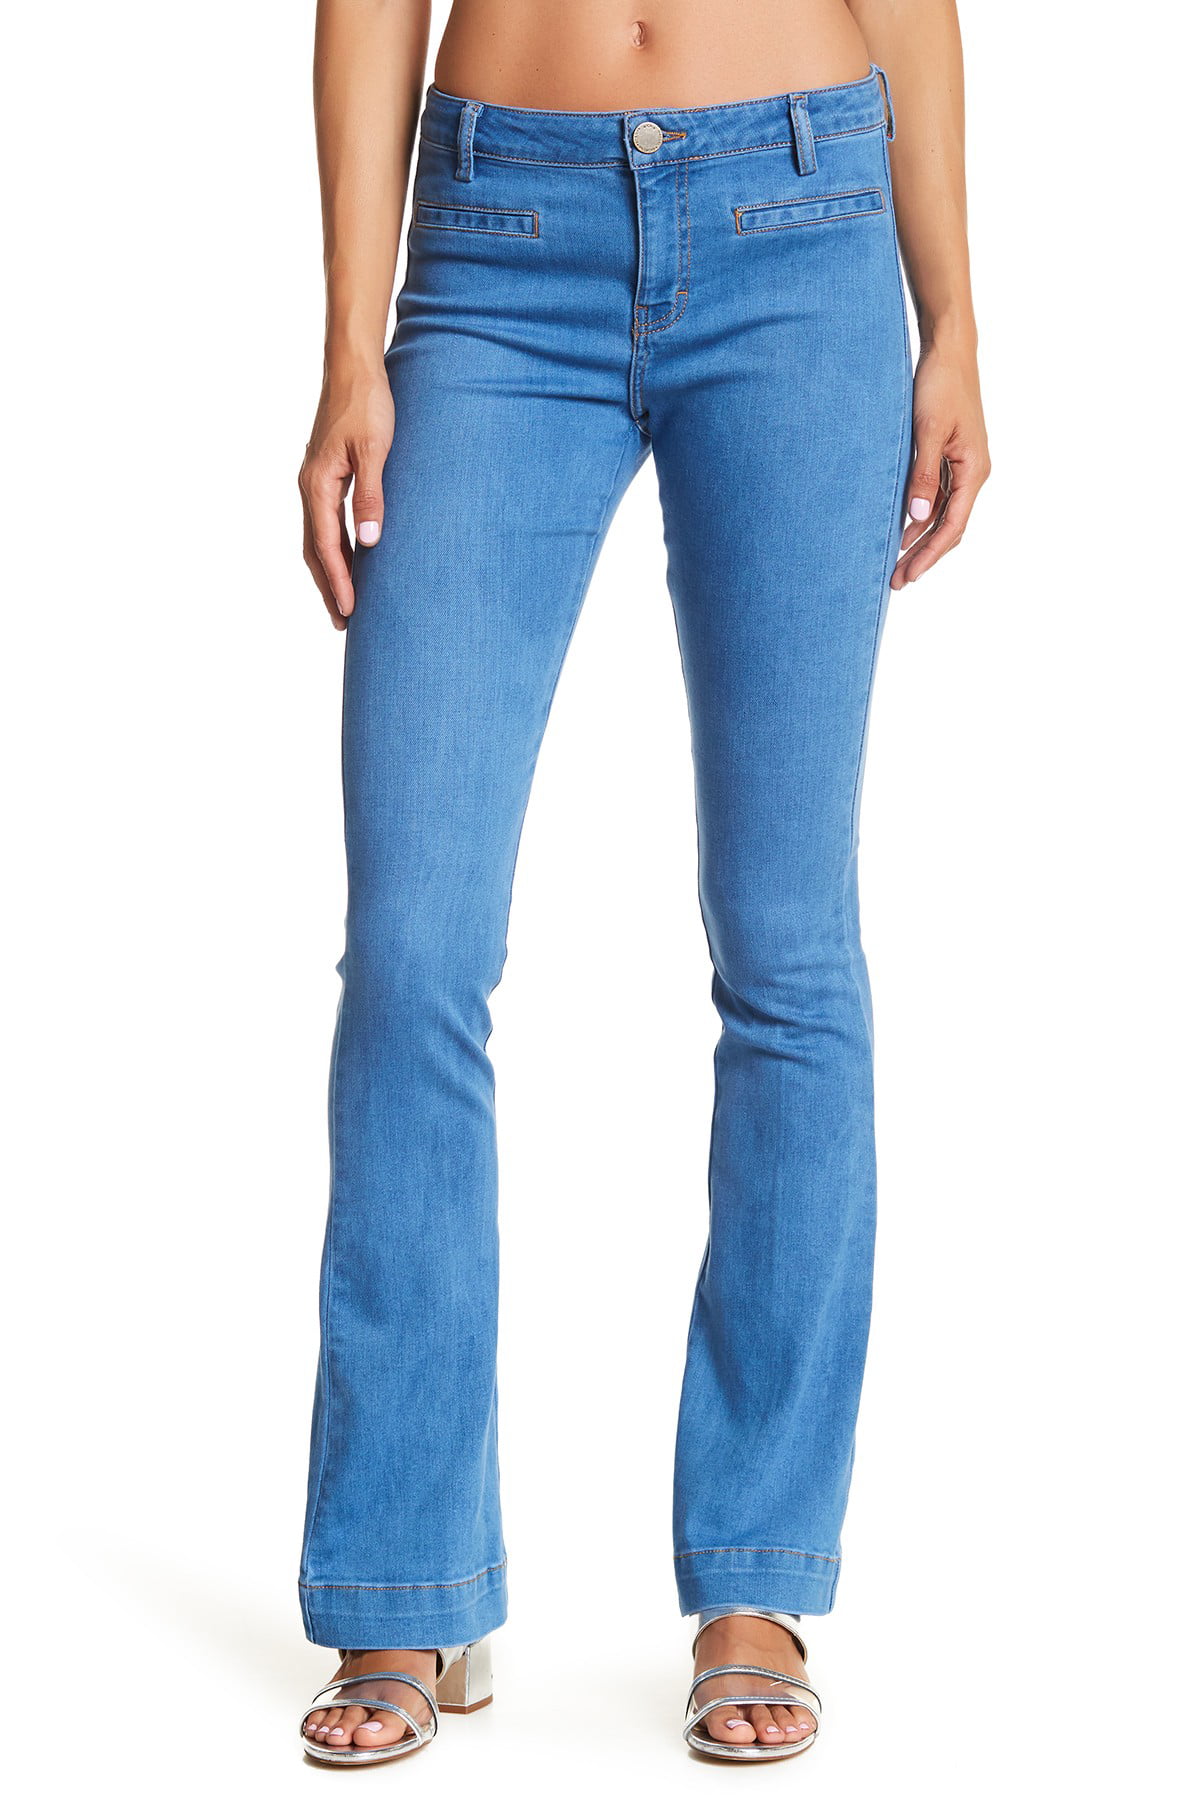 Etienne Marcel - Womens Jeans Relaxed Fit Flare Stretch 25 - Walmart ...